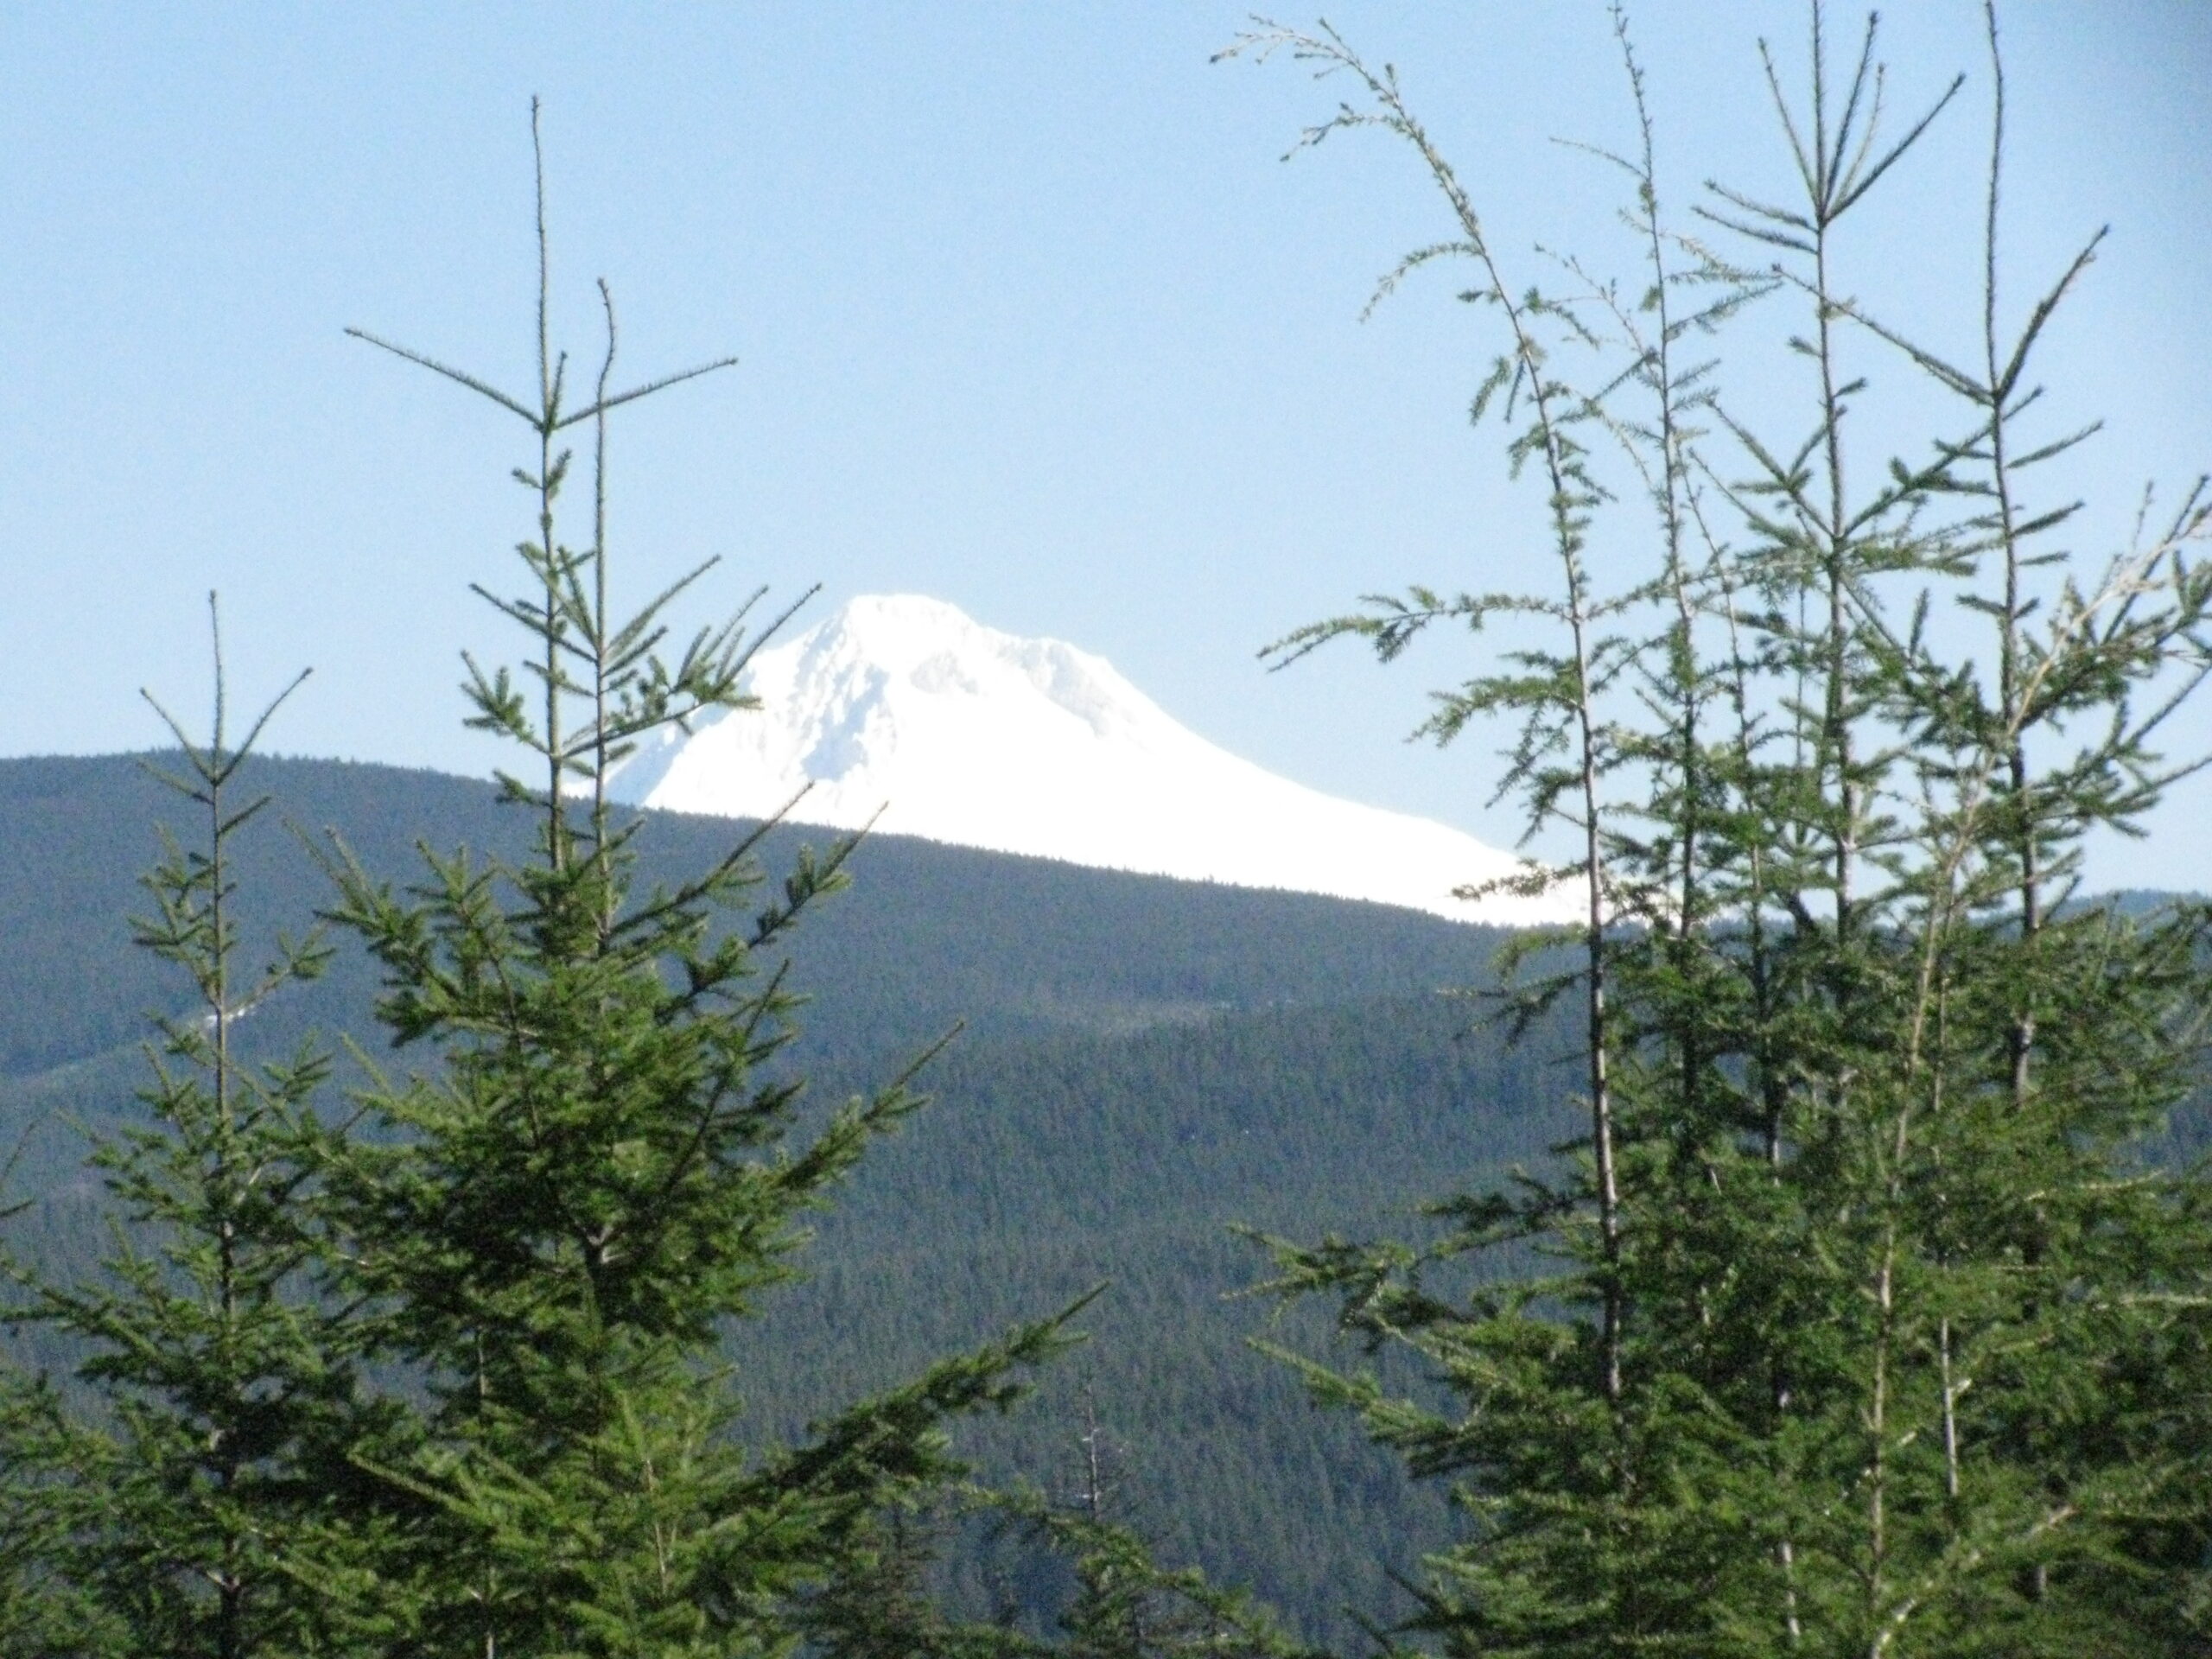 Mount Hood is peaking out behind a forested hill, framed by two trees in the foreground.